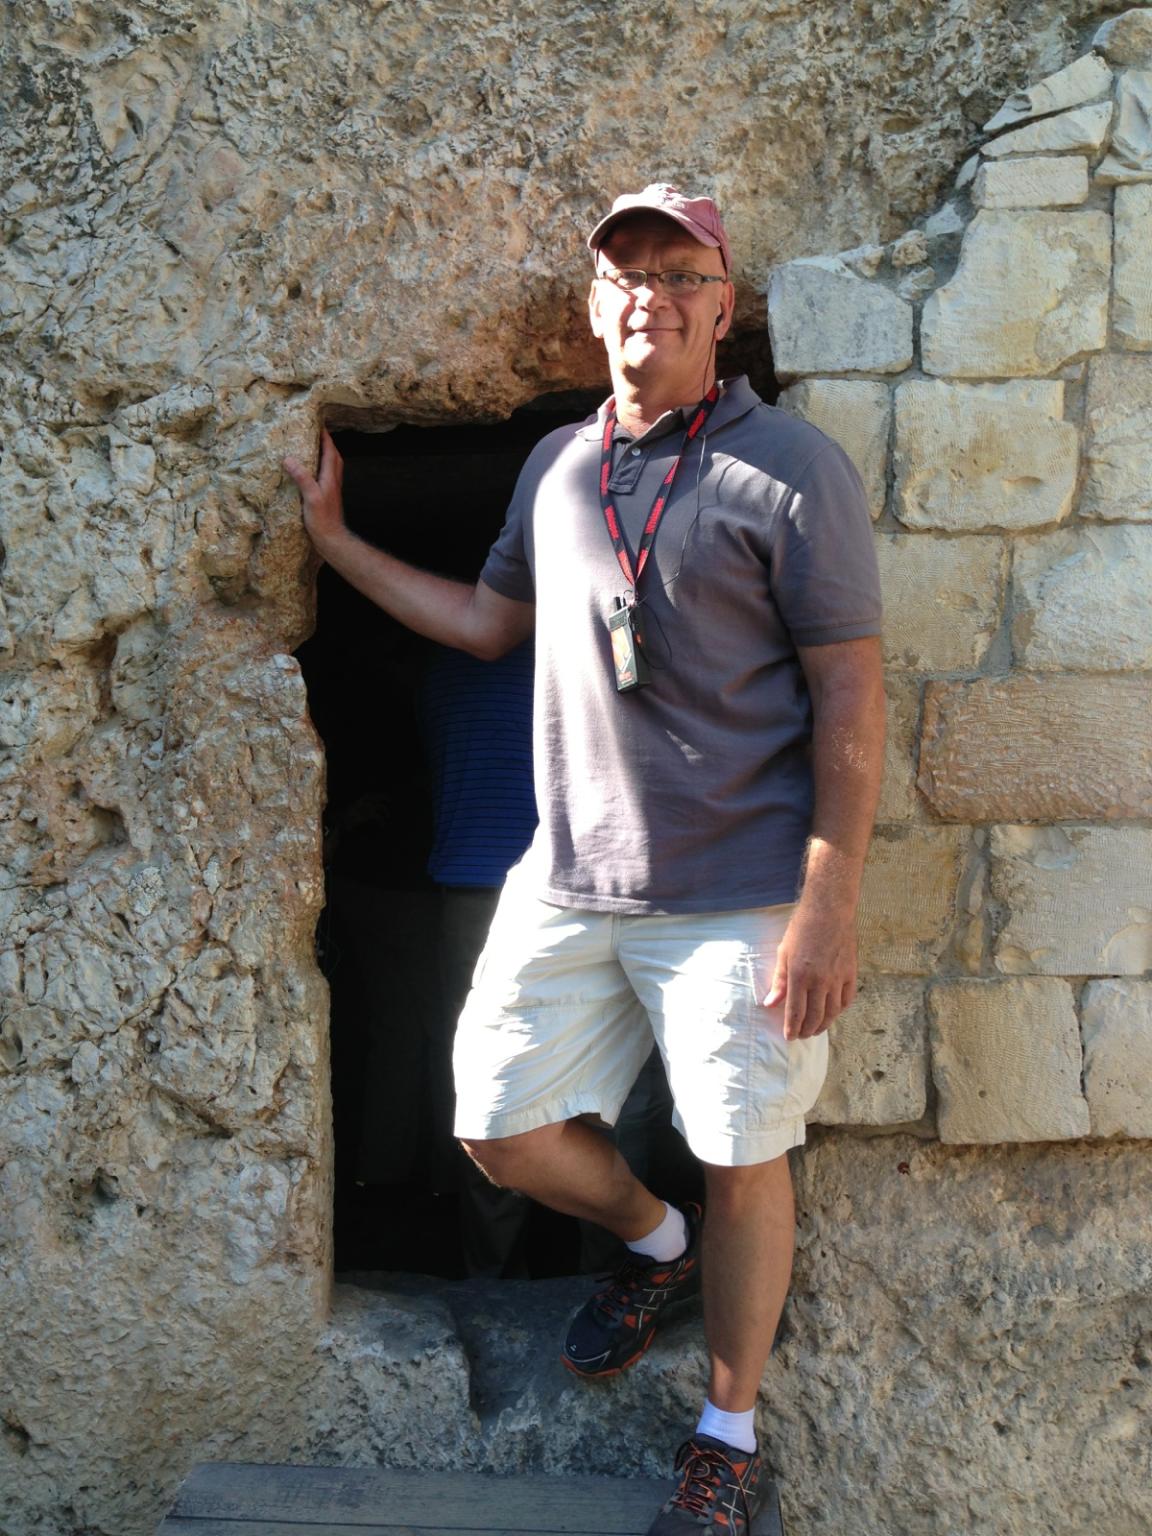 Ken at the Tomb